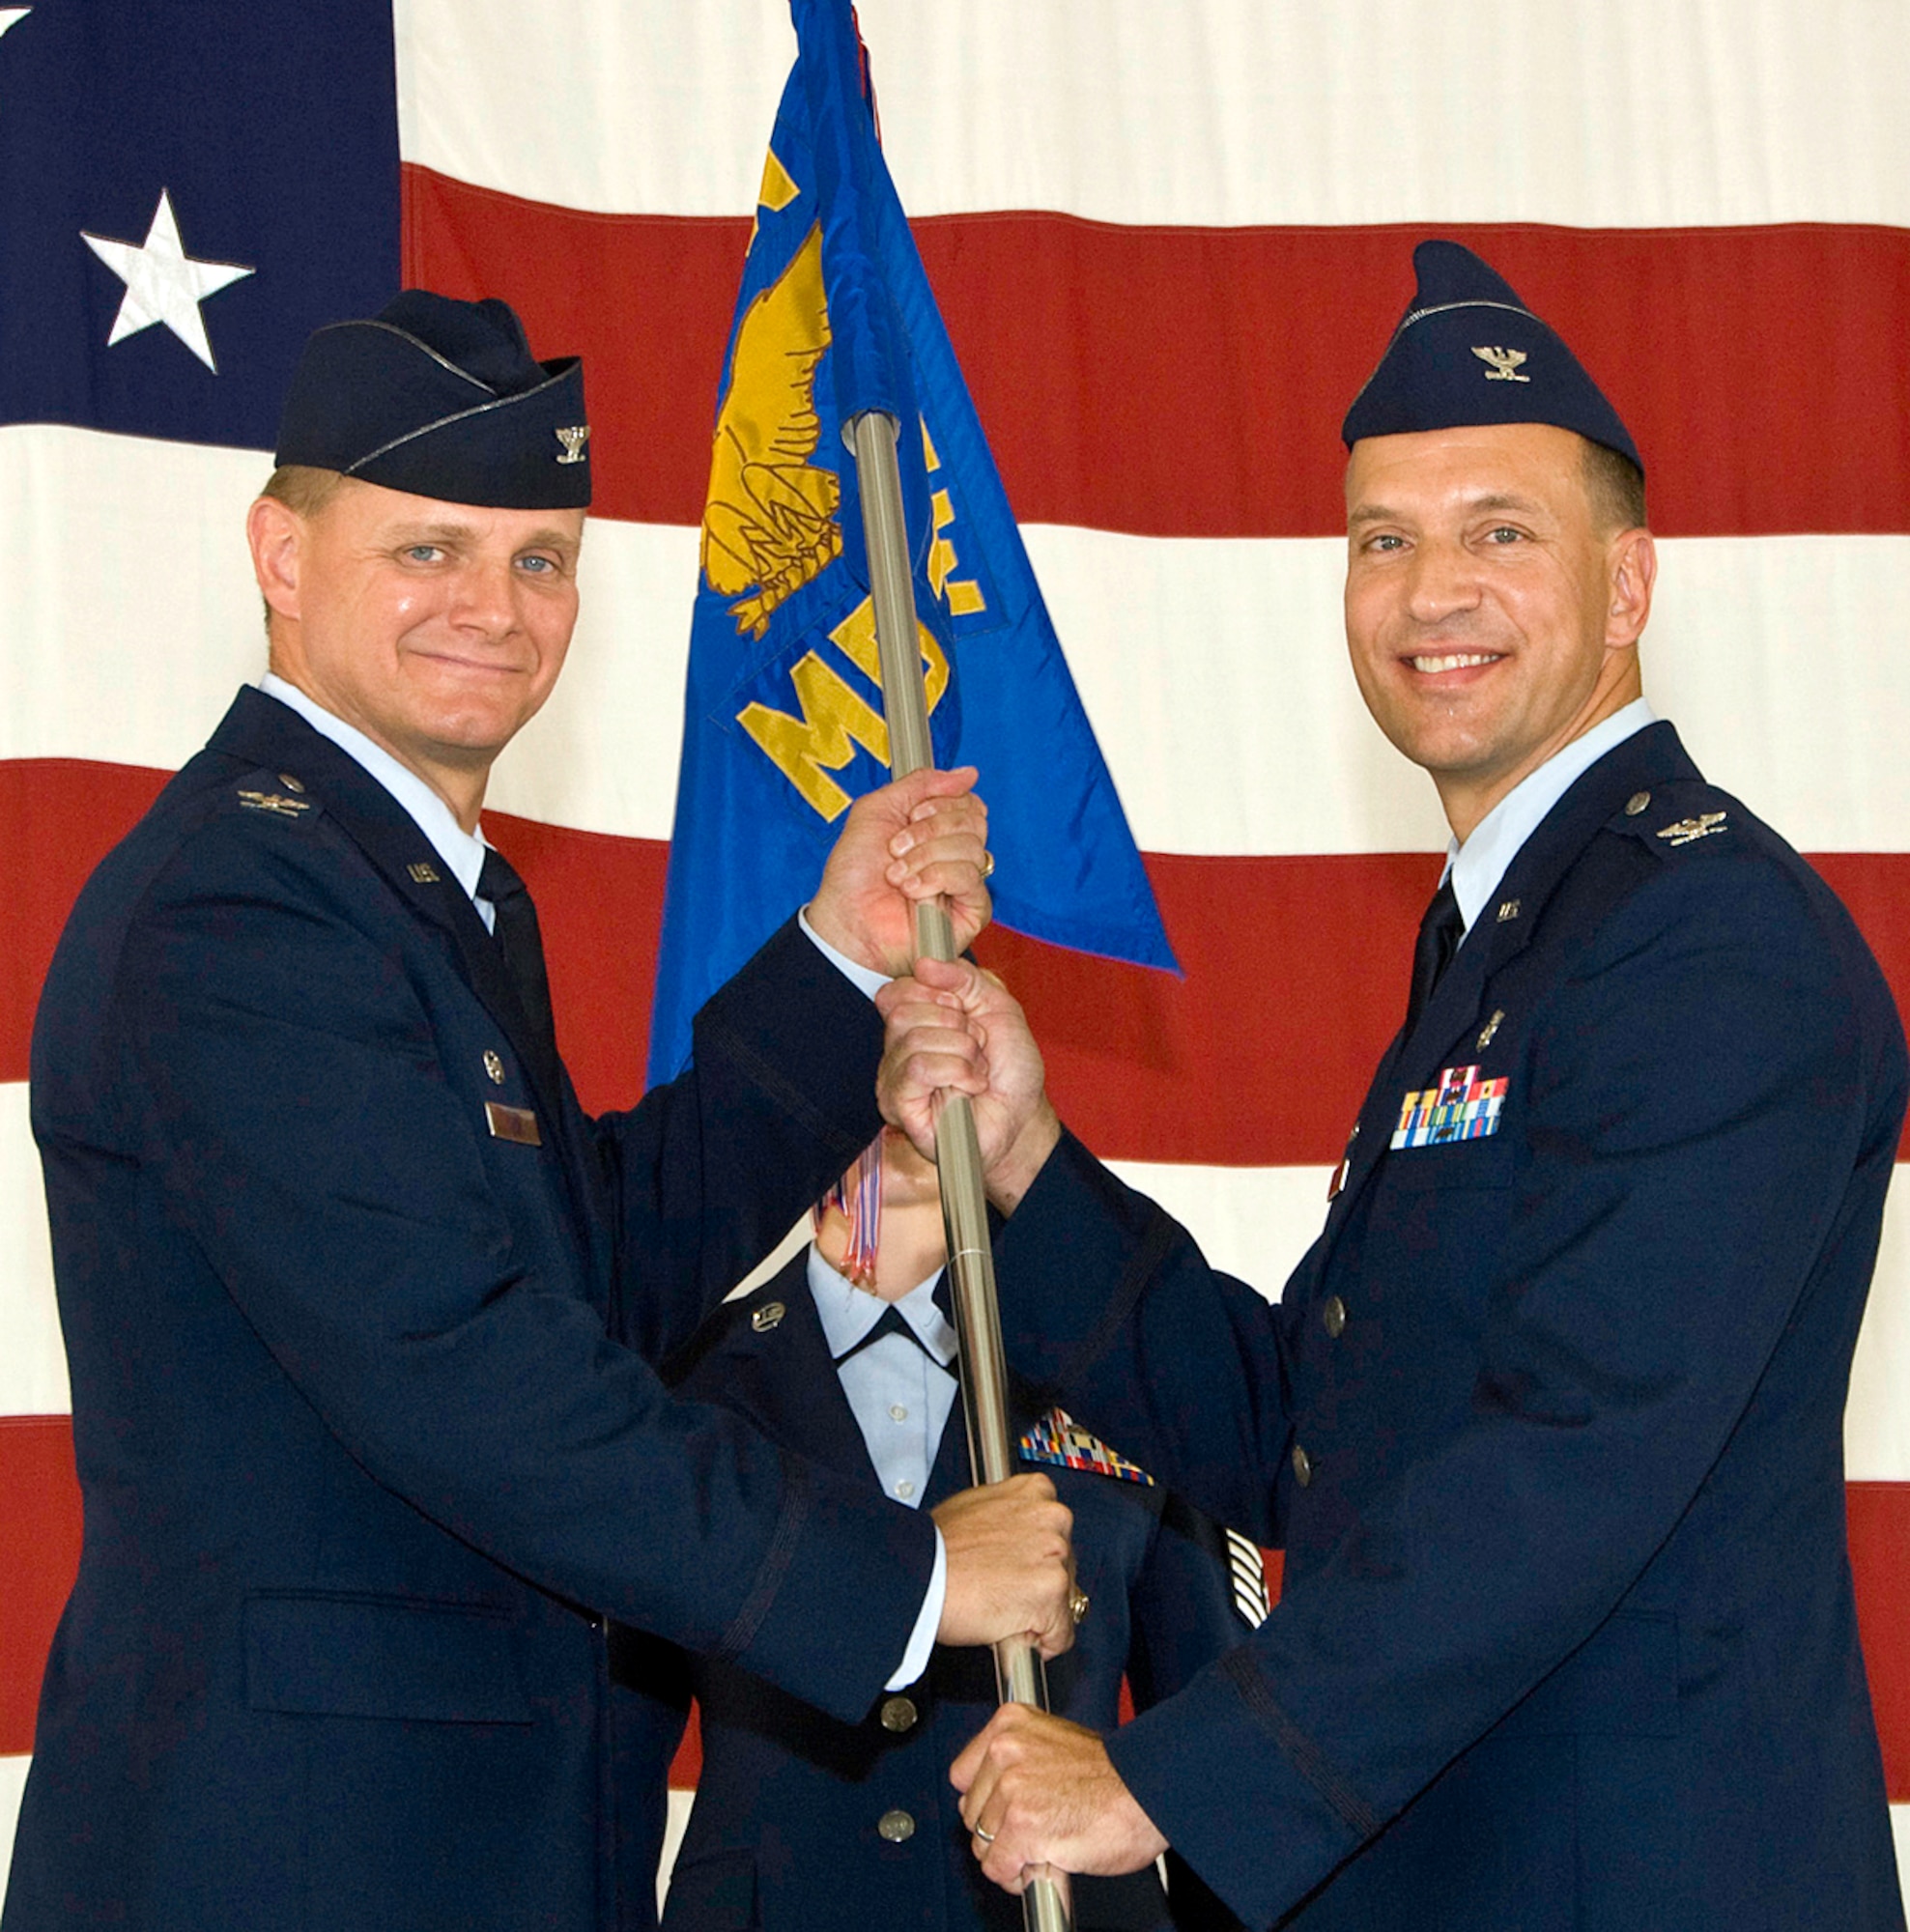 Col. Douglas Curry, right, accepts command of the 71st Medical Group from Col. Russ Mack, 71st Flying Training Wing commander, during a ceremony July 29 in Hangar 199. Colonel Curry comes to Vance from the 96th Dental Squadron at Eglin AFB, Fla. Col. Otha Solomon, the previous commander of the Medical Group, is retiring from the Air Force and moving to Alabama. (U.S. Air Force photo/ Terry Wasson)